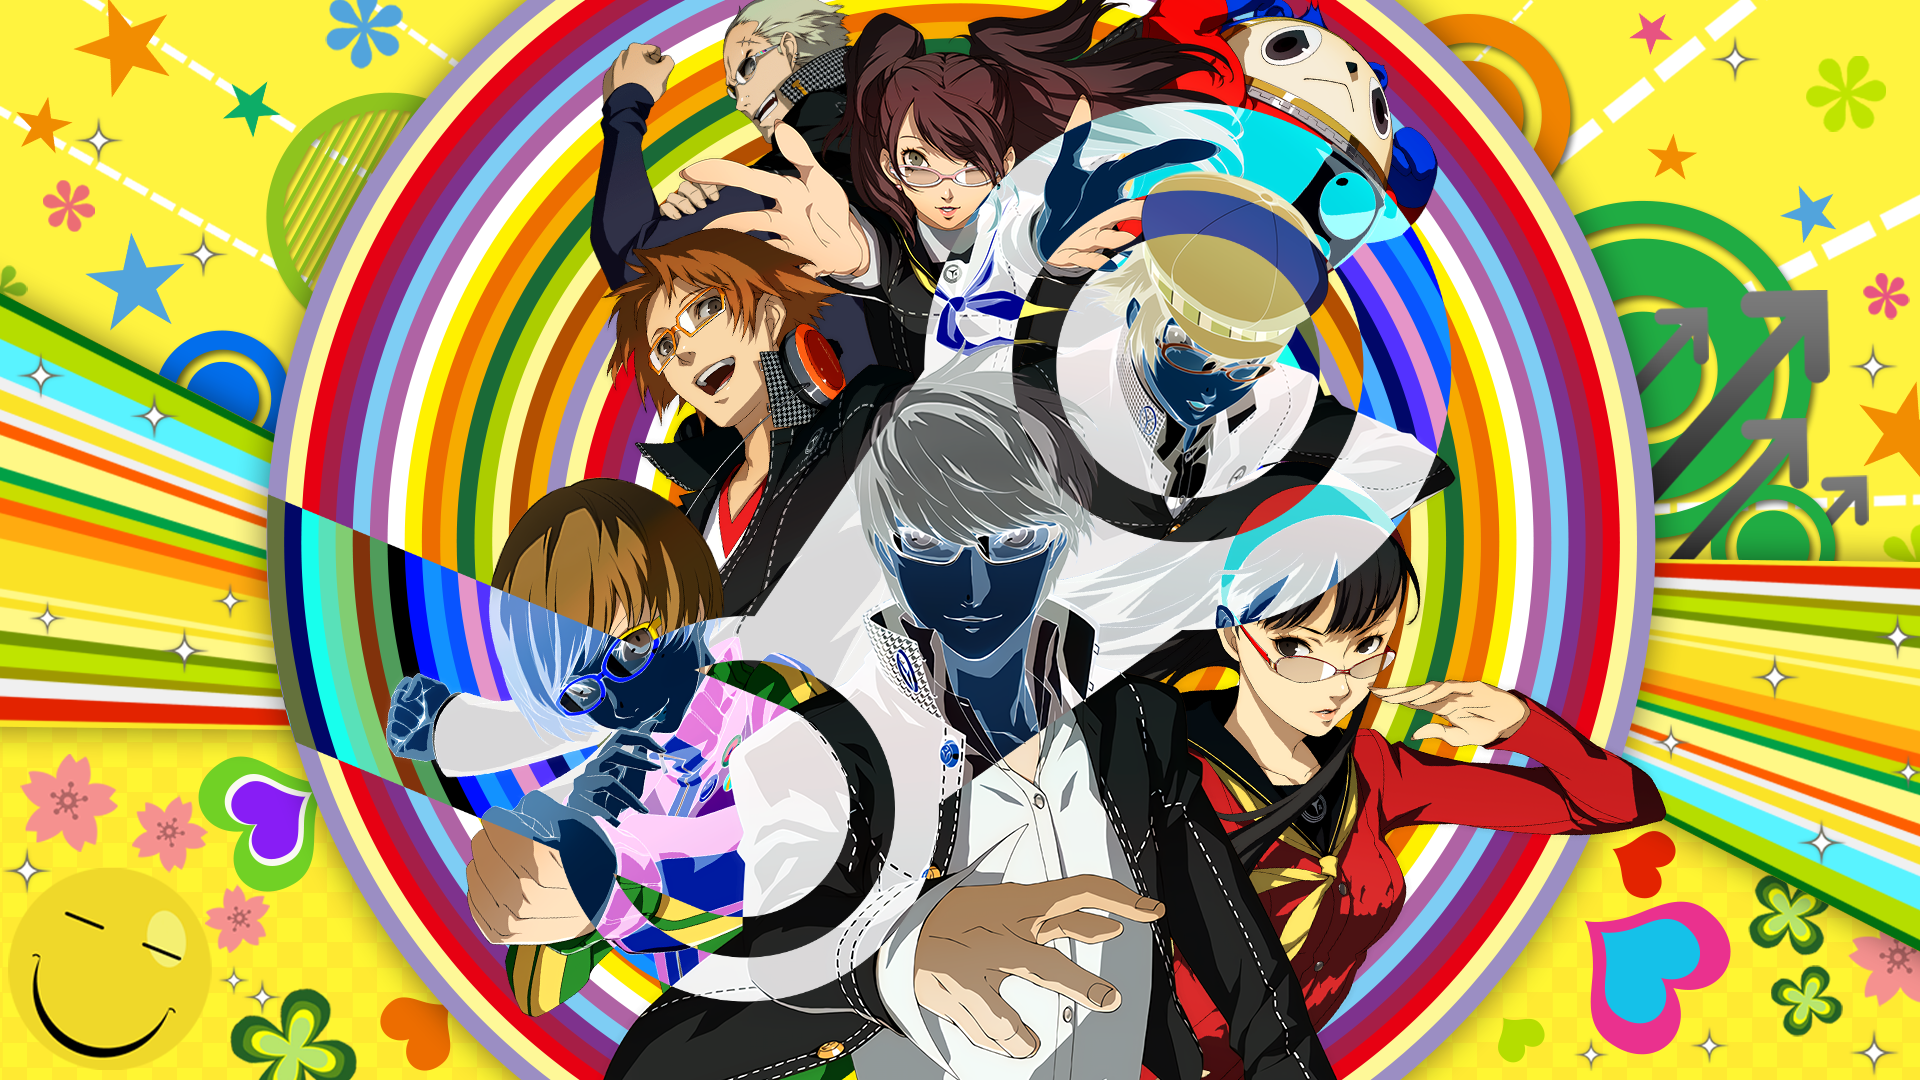 Persona 4 Golden out now to buy and play on Steam » SEGAbits - #1 ...